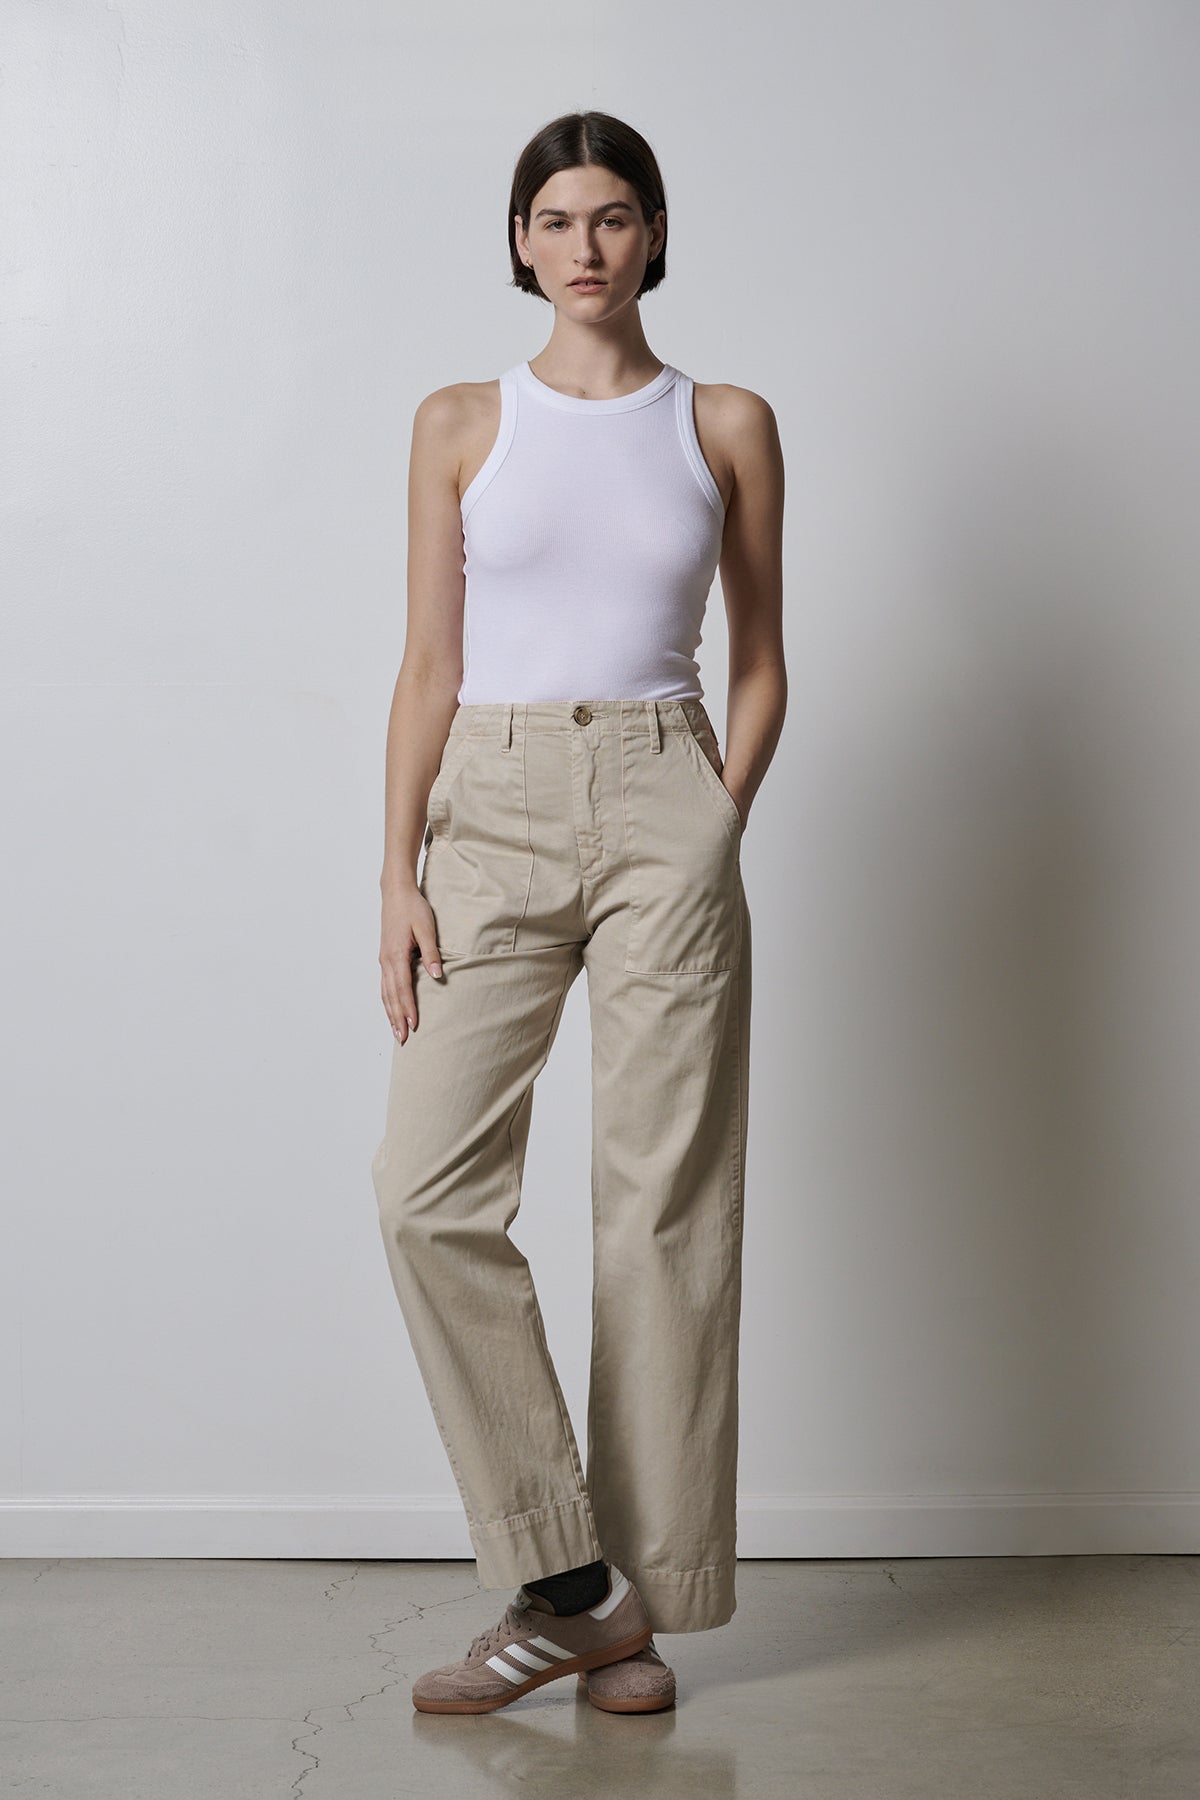 The model is wearing a white Velvet by Jenny Graham Cruz tank top that fits perfectly with khaki pants.-35417028001985